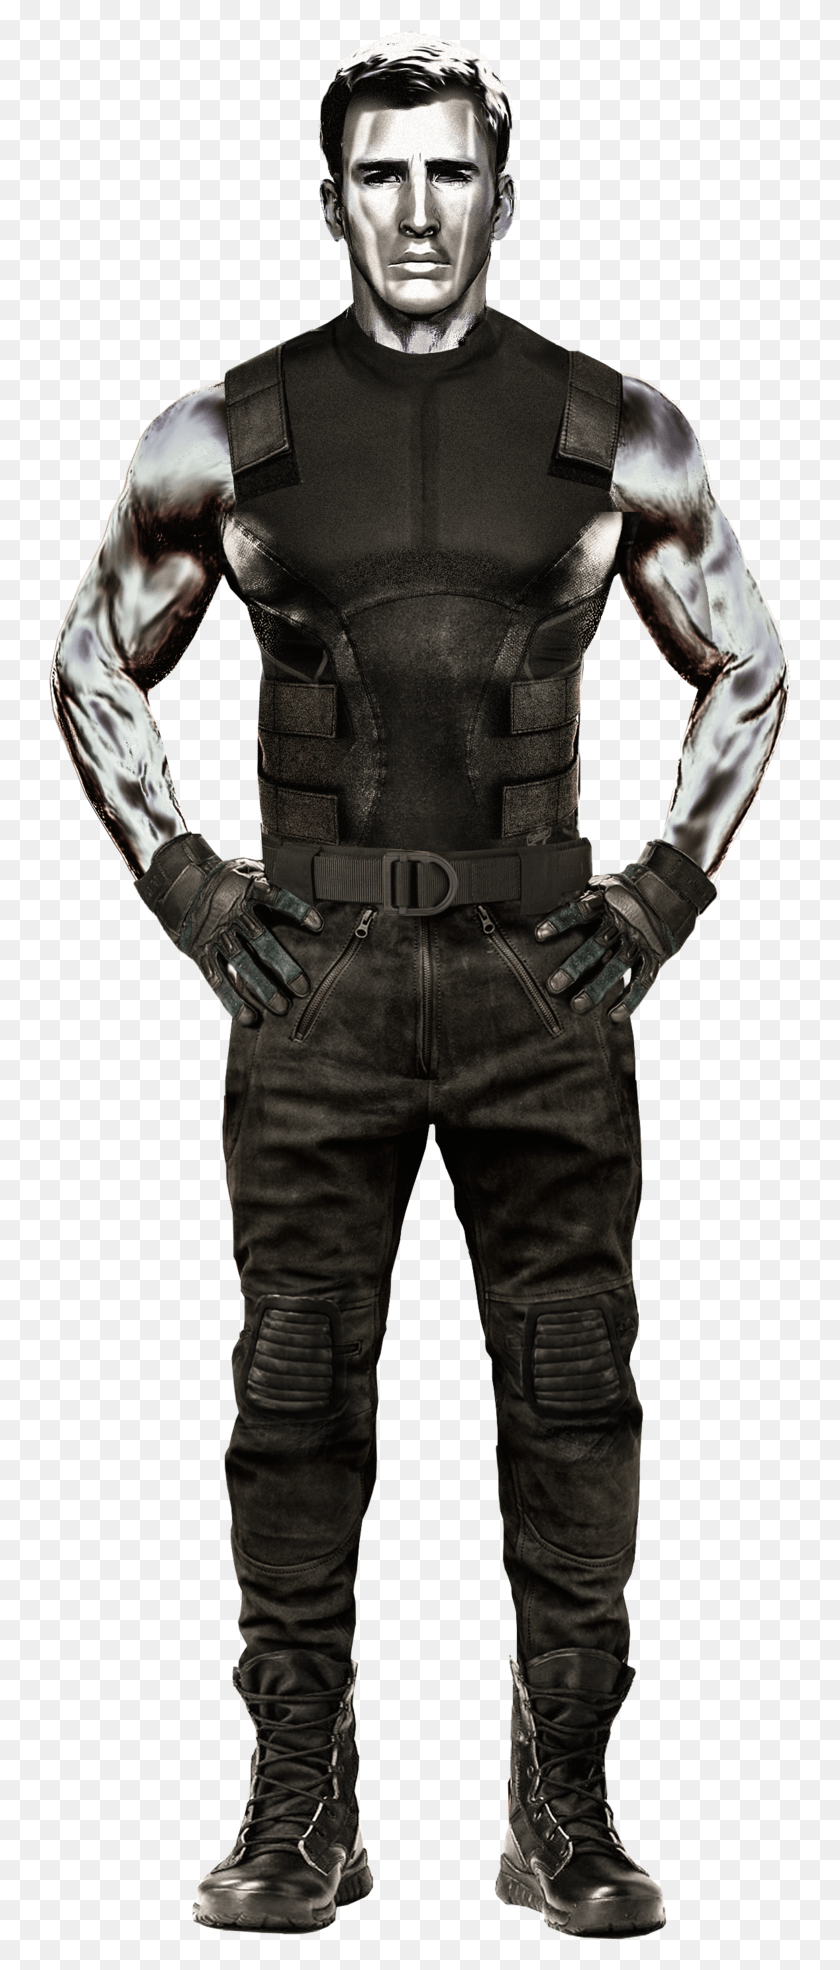 743x1910 Descargar Png / Colossus Avengers Endgame Thanos, Persona, Humano, Ropa Hd Png